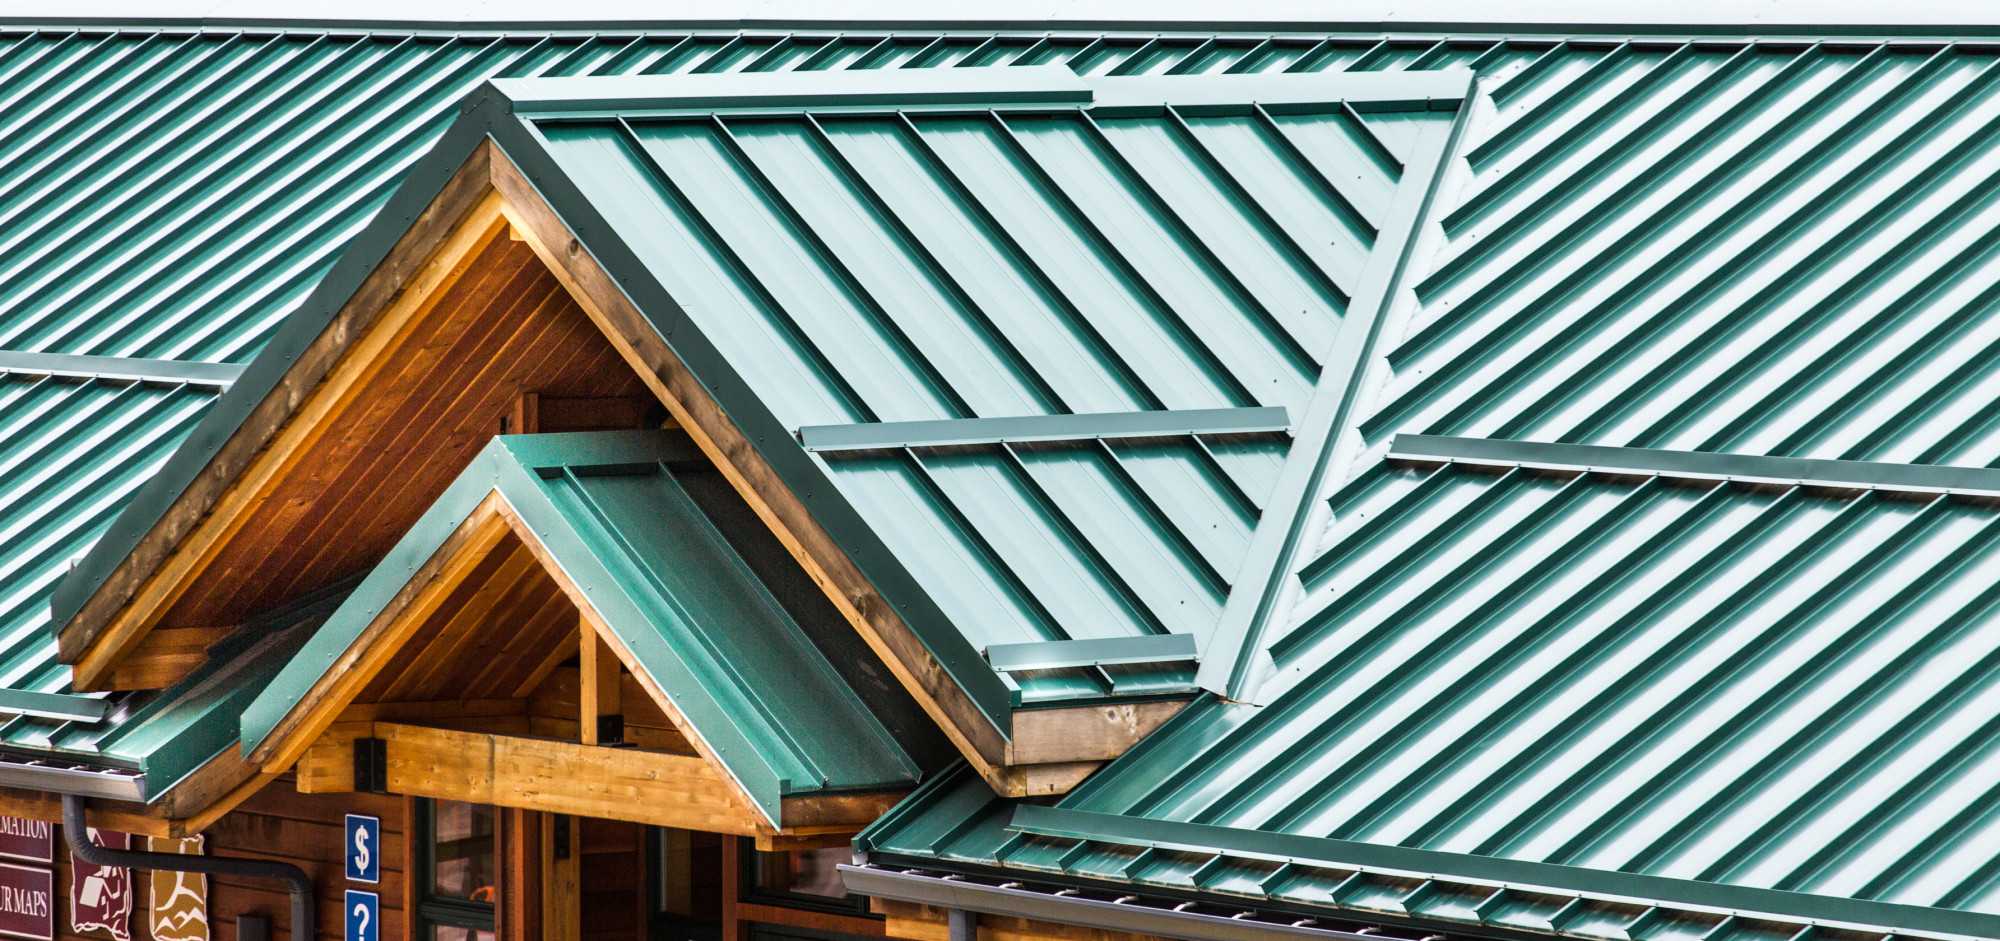 3 Reasons Metal Roofing Works for Your Denver Home